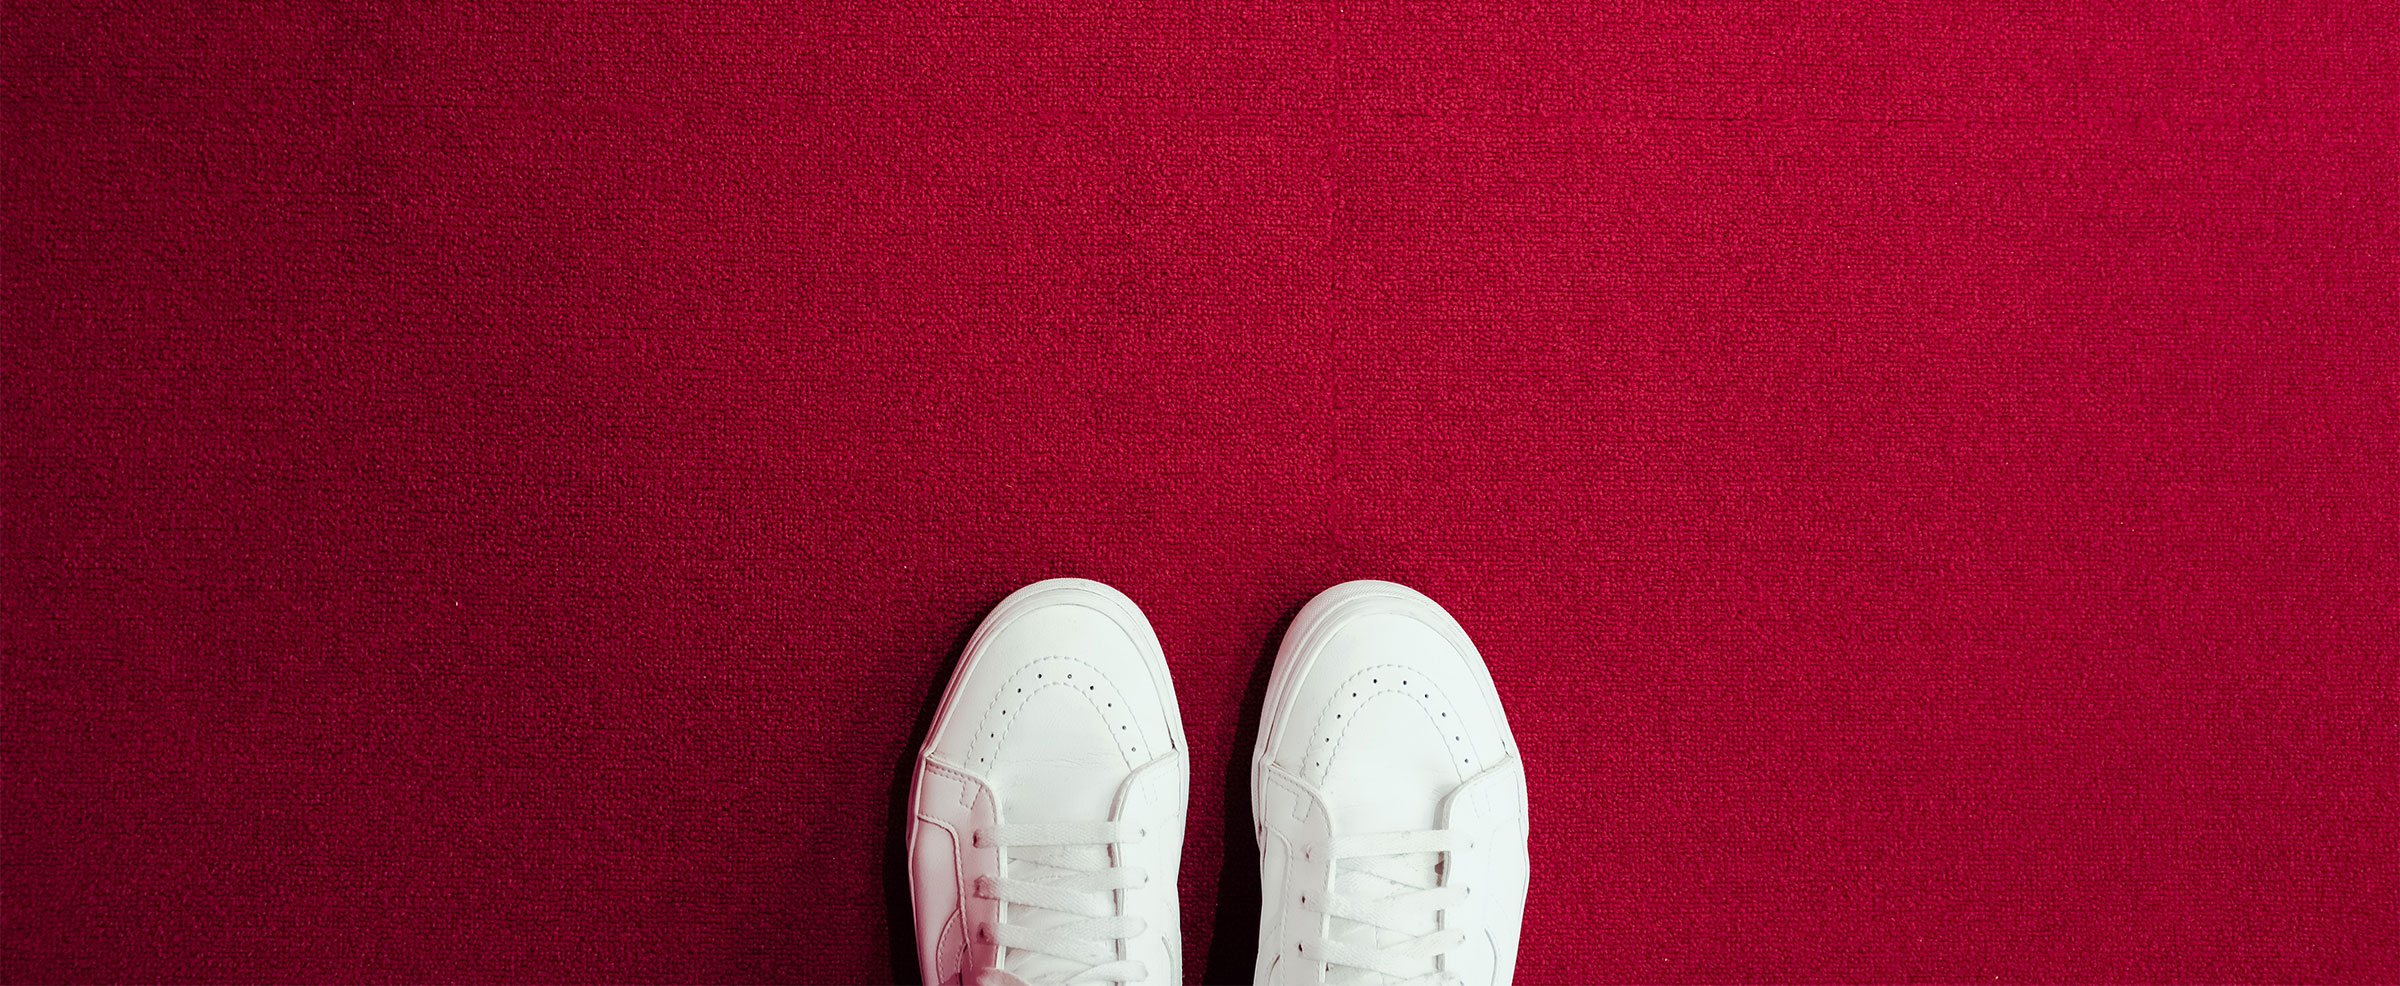 white shoes ready to step forward on red carpet